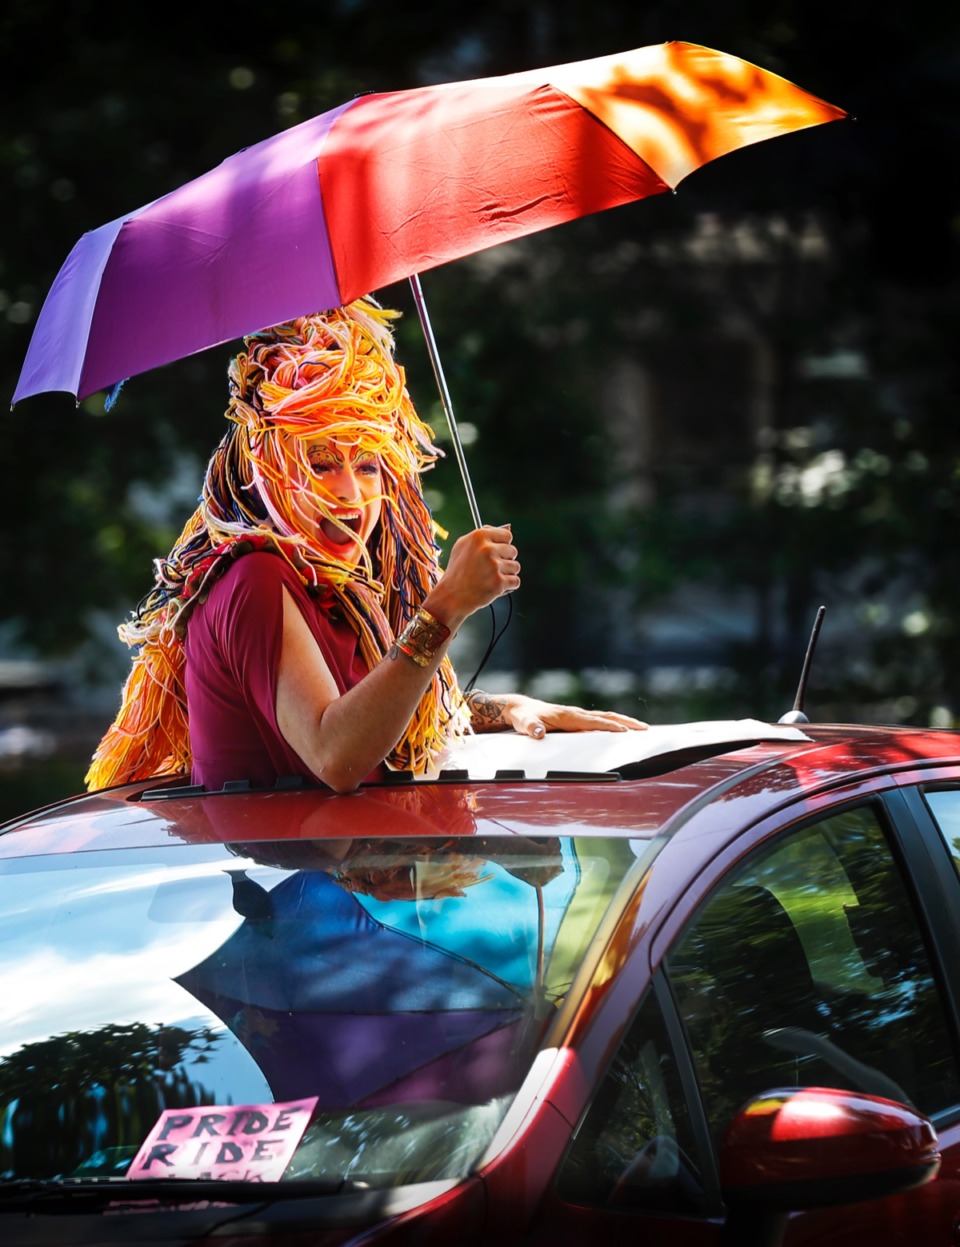 <strong>Hundreds took part in a LGBTQ pride ride on Saturday, June 13, 2020 through several neighborhoods on their way to the National Civil Rights Museum. They rode to support the end of police brutality and advance the Pride movement</strong>. (Mark Weber/Daily Memphian)